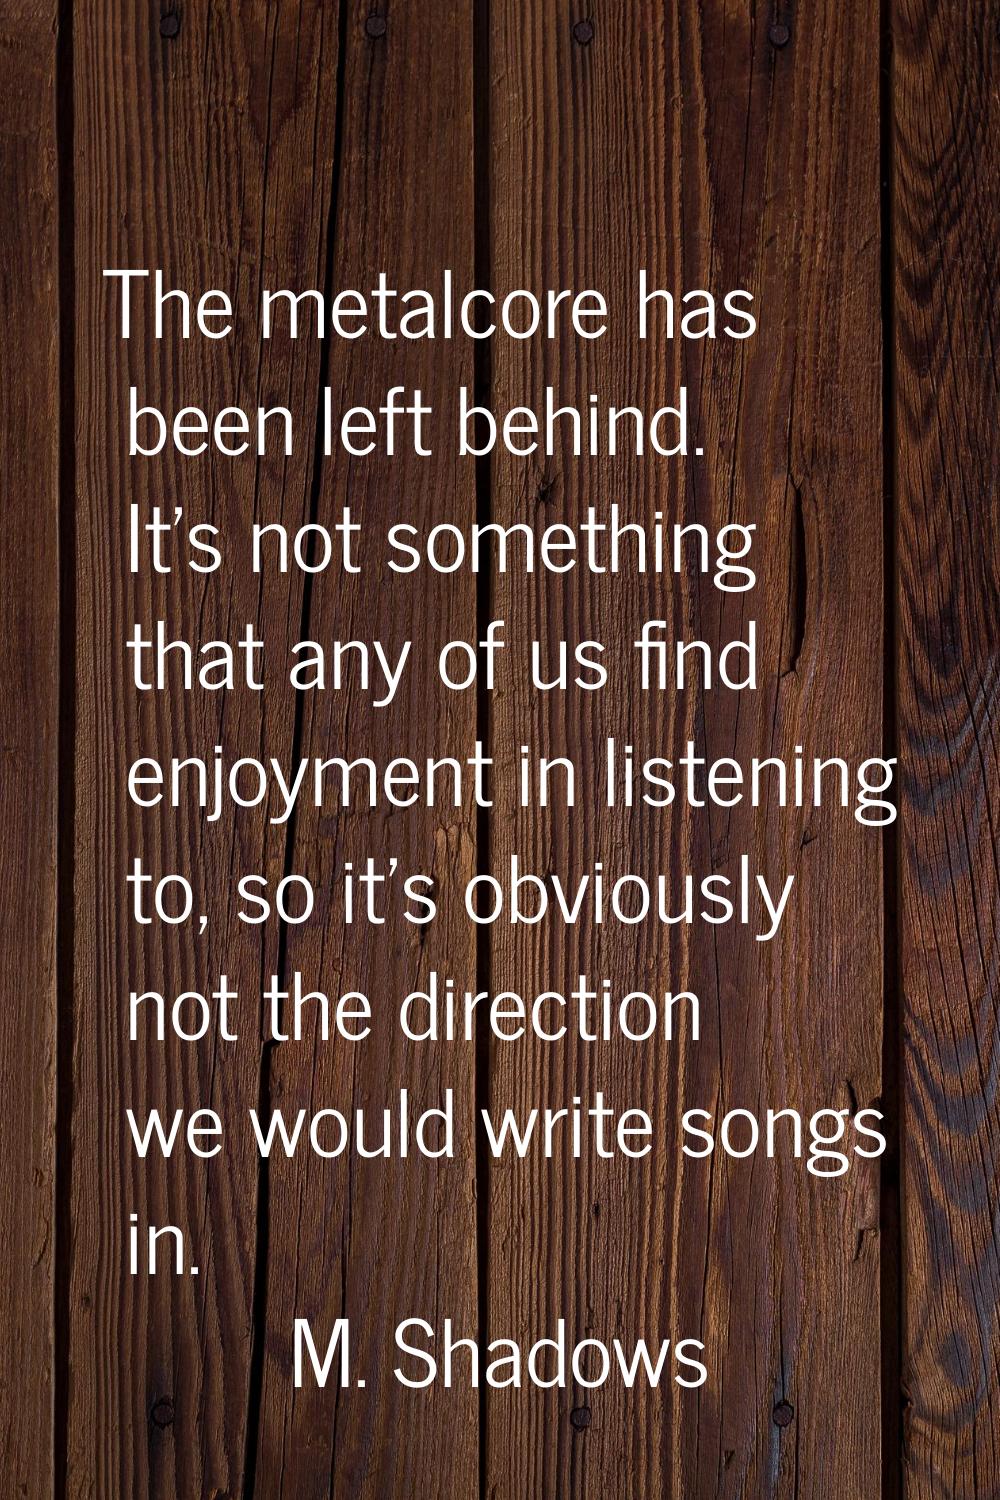 The metalcore has been left behind. It's not something that any of us find enjoyment in listening t